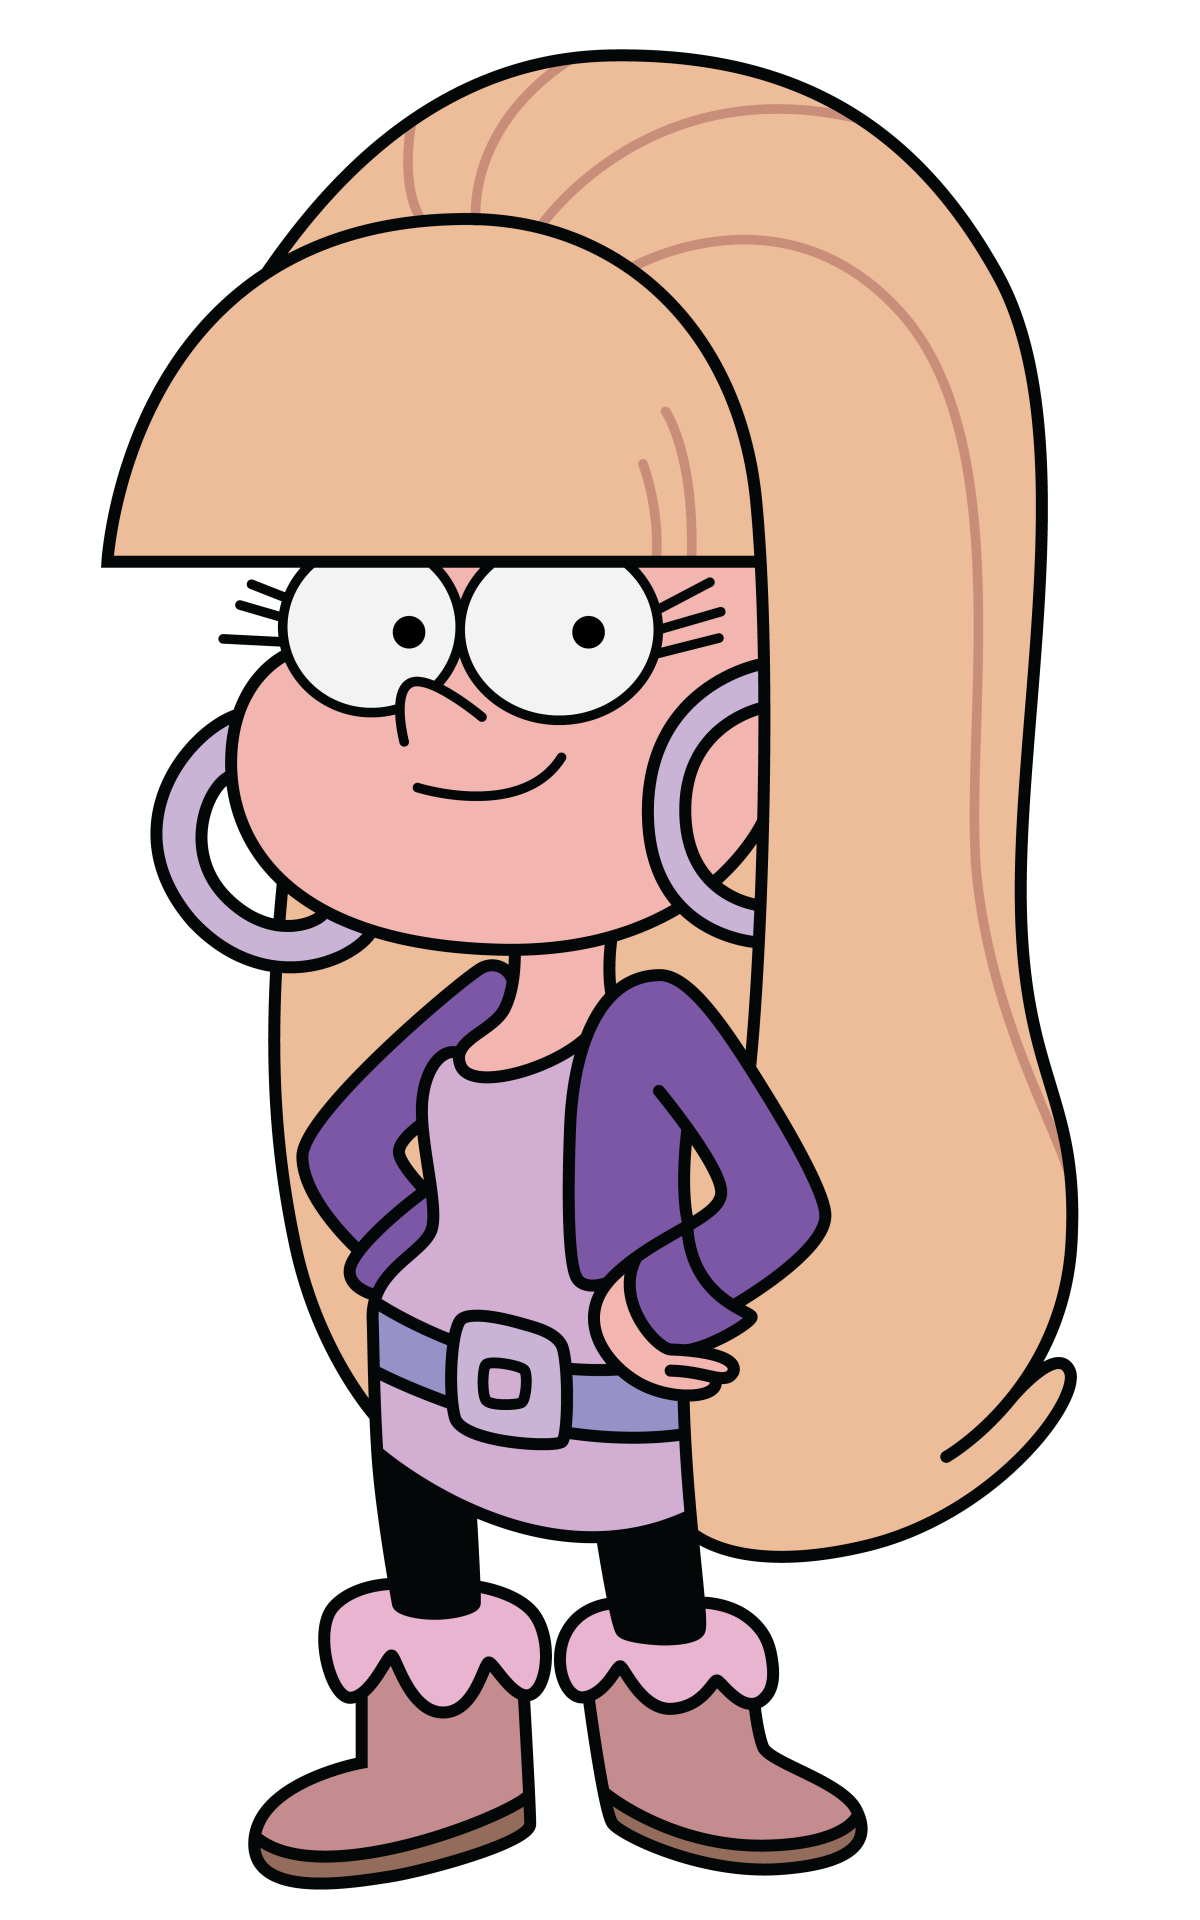 Gravity Falls - Mabel Pines x Pacifica Northwest 